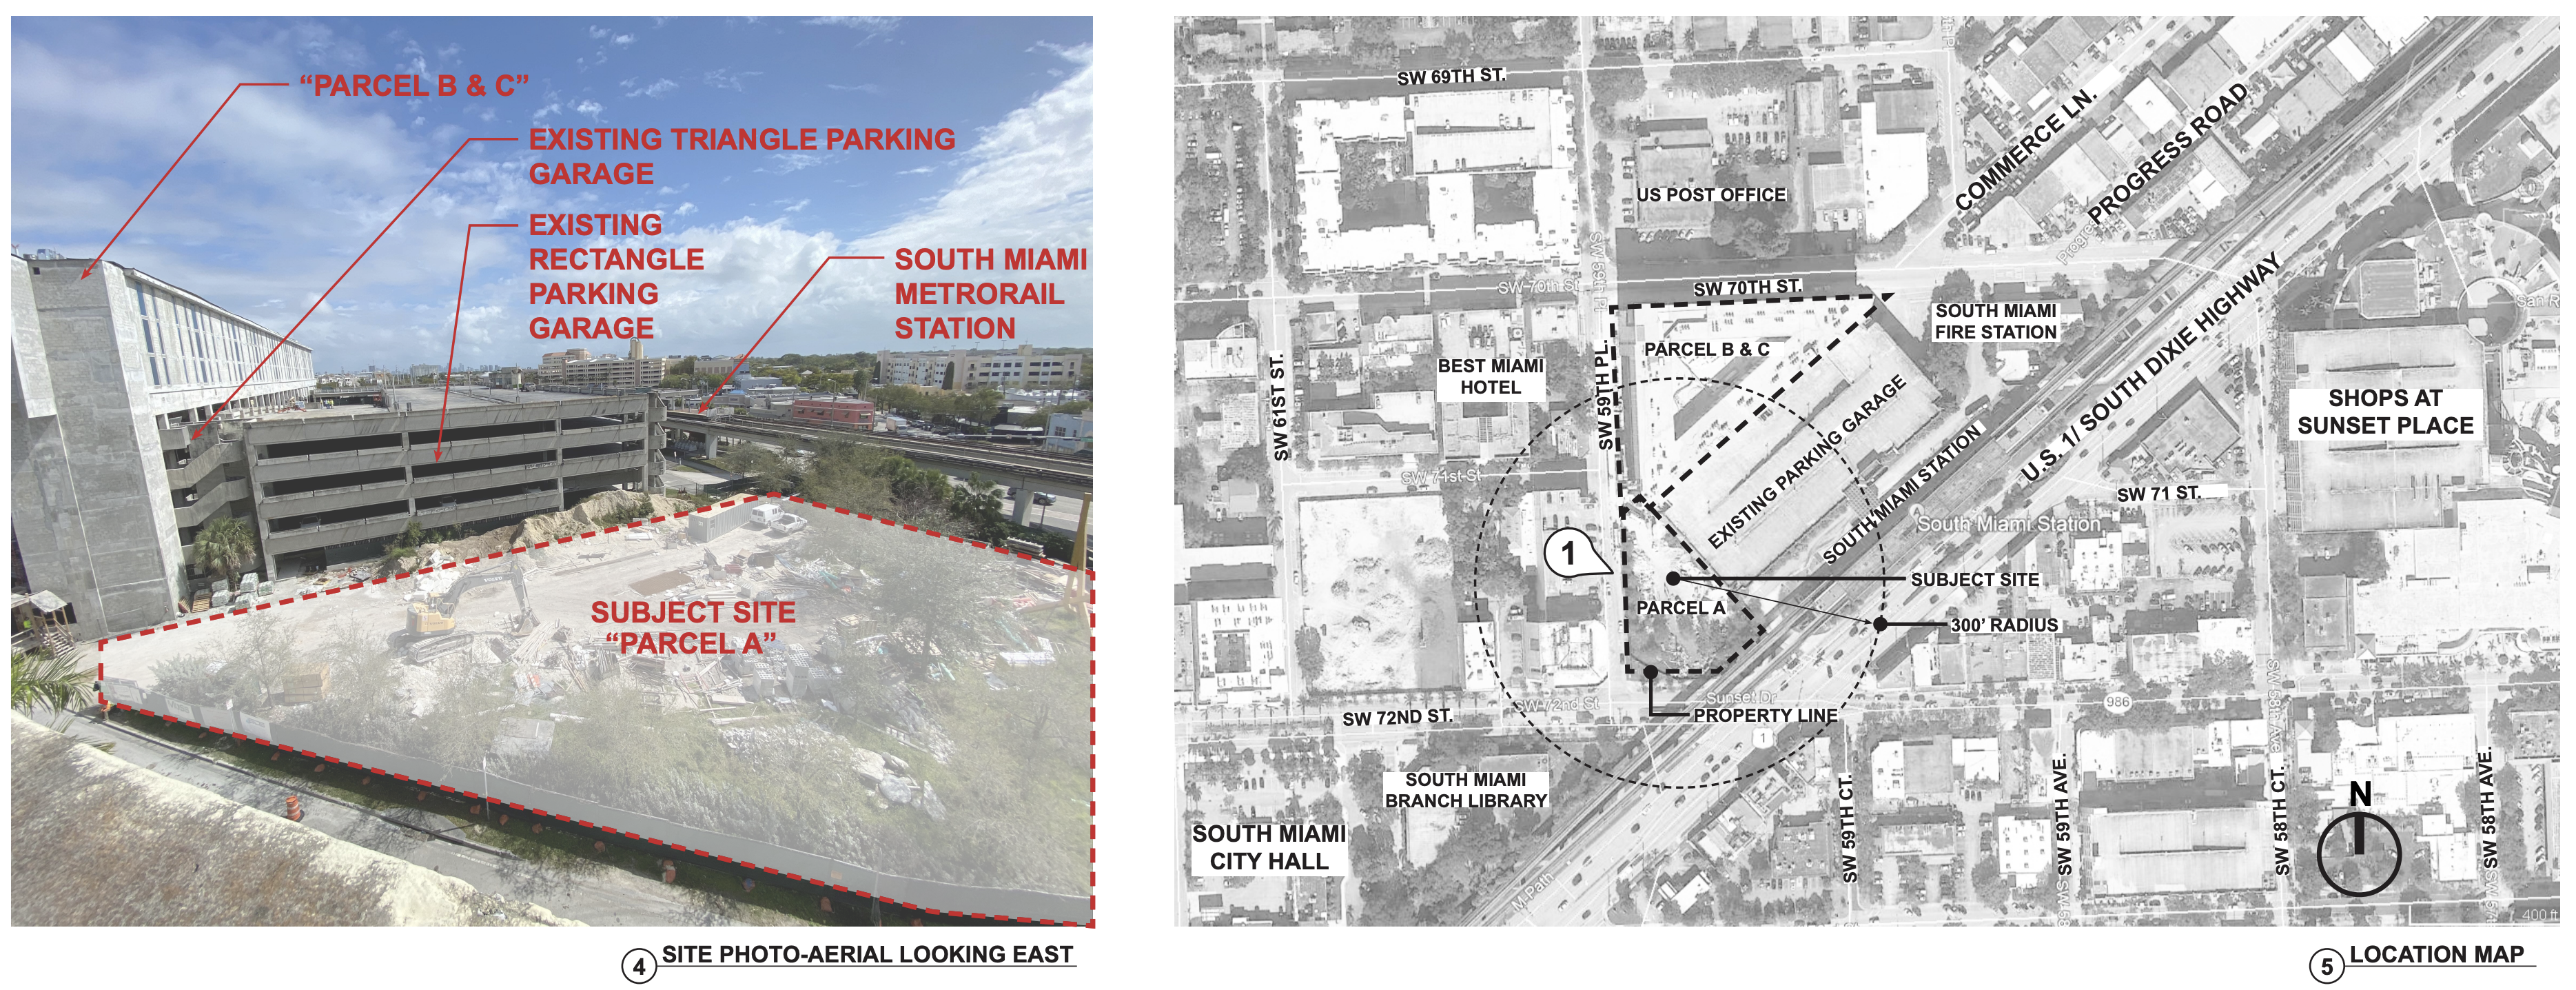 Site Plan & Map Location. Courtesy of Modis Architects.